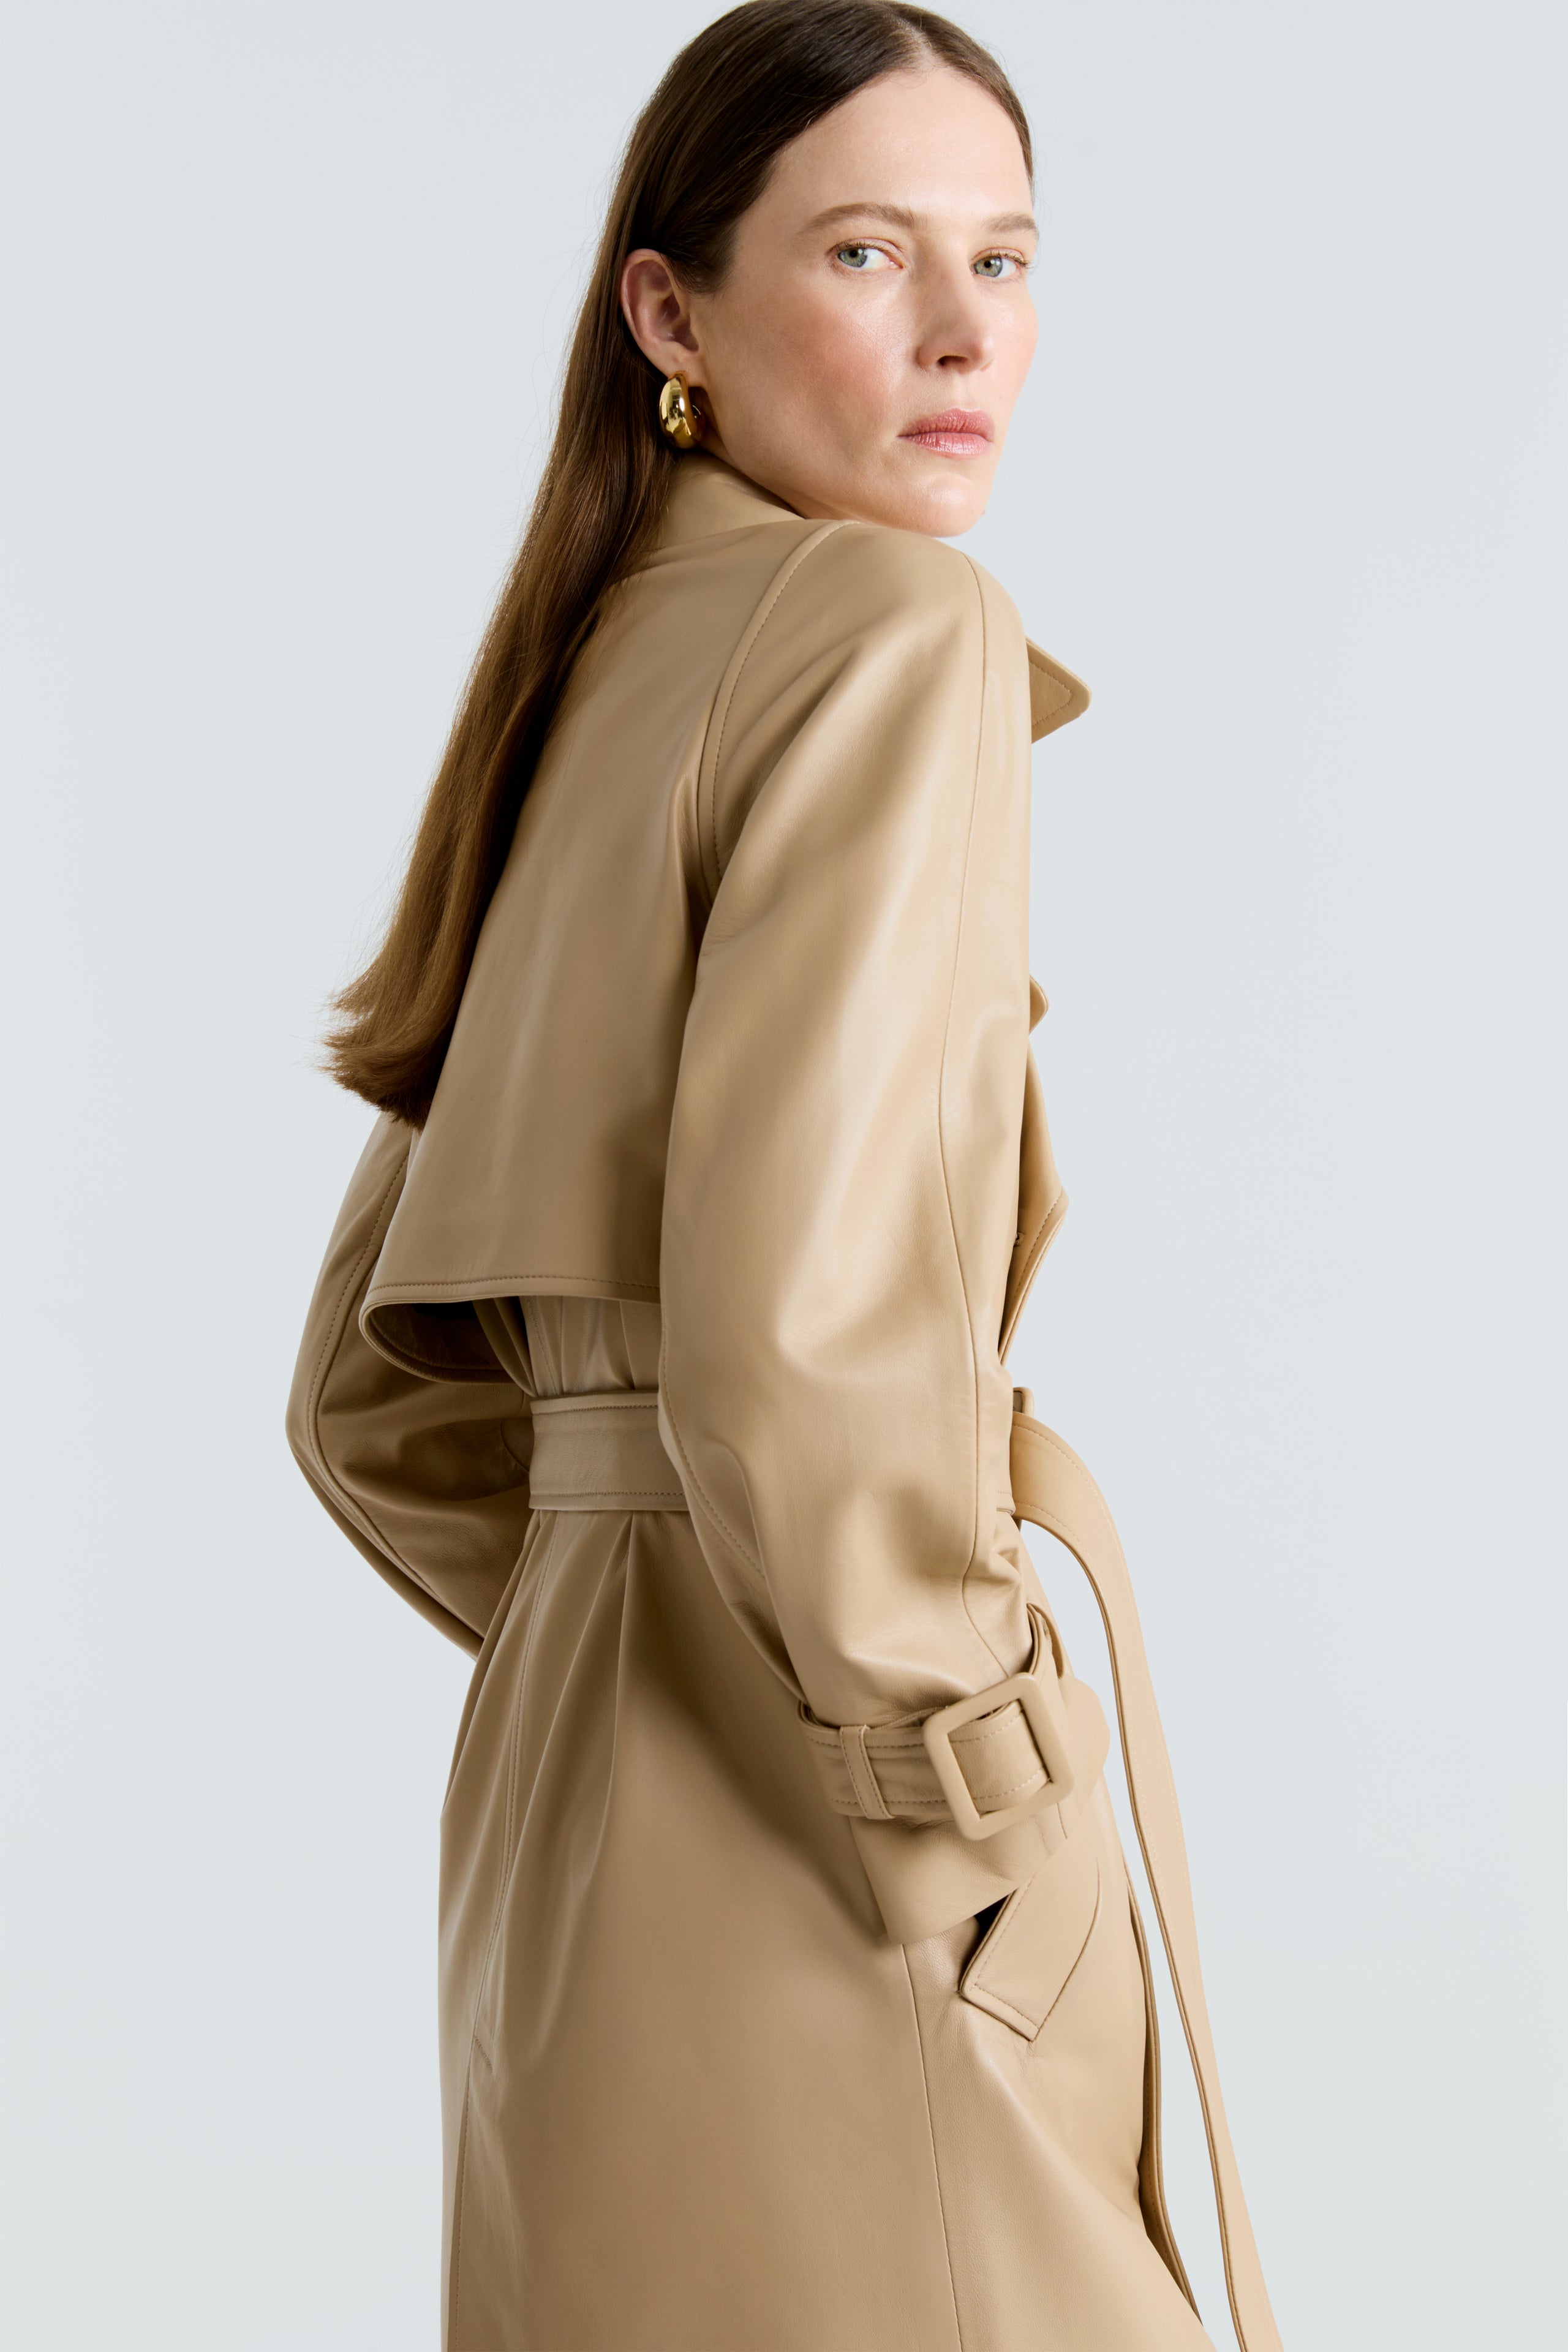 Model is wearing the Henri Beige Oversized Leather Trench Close Up